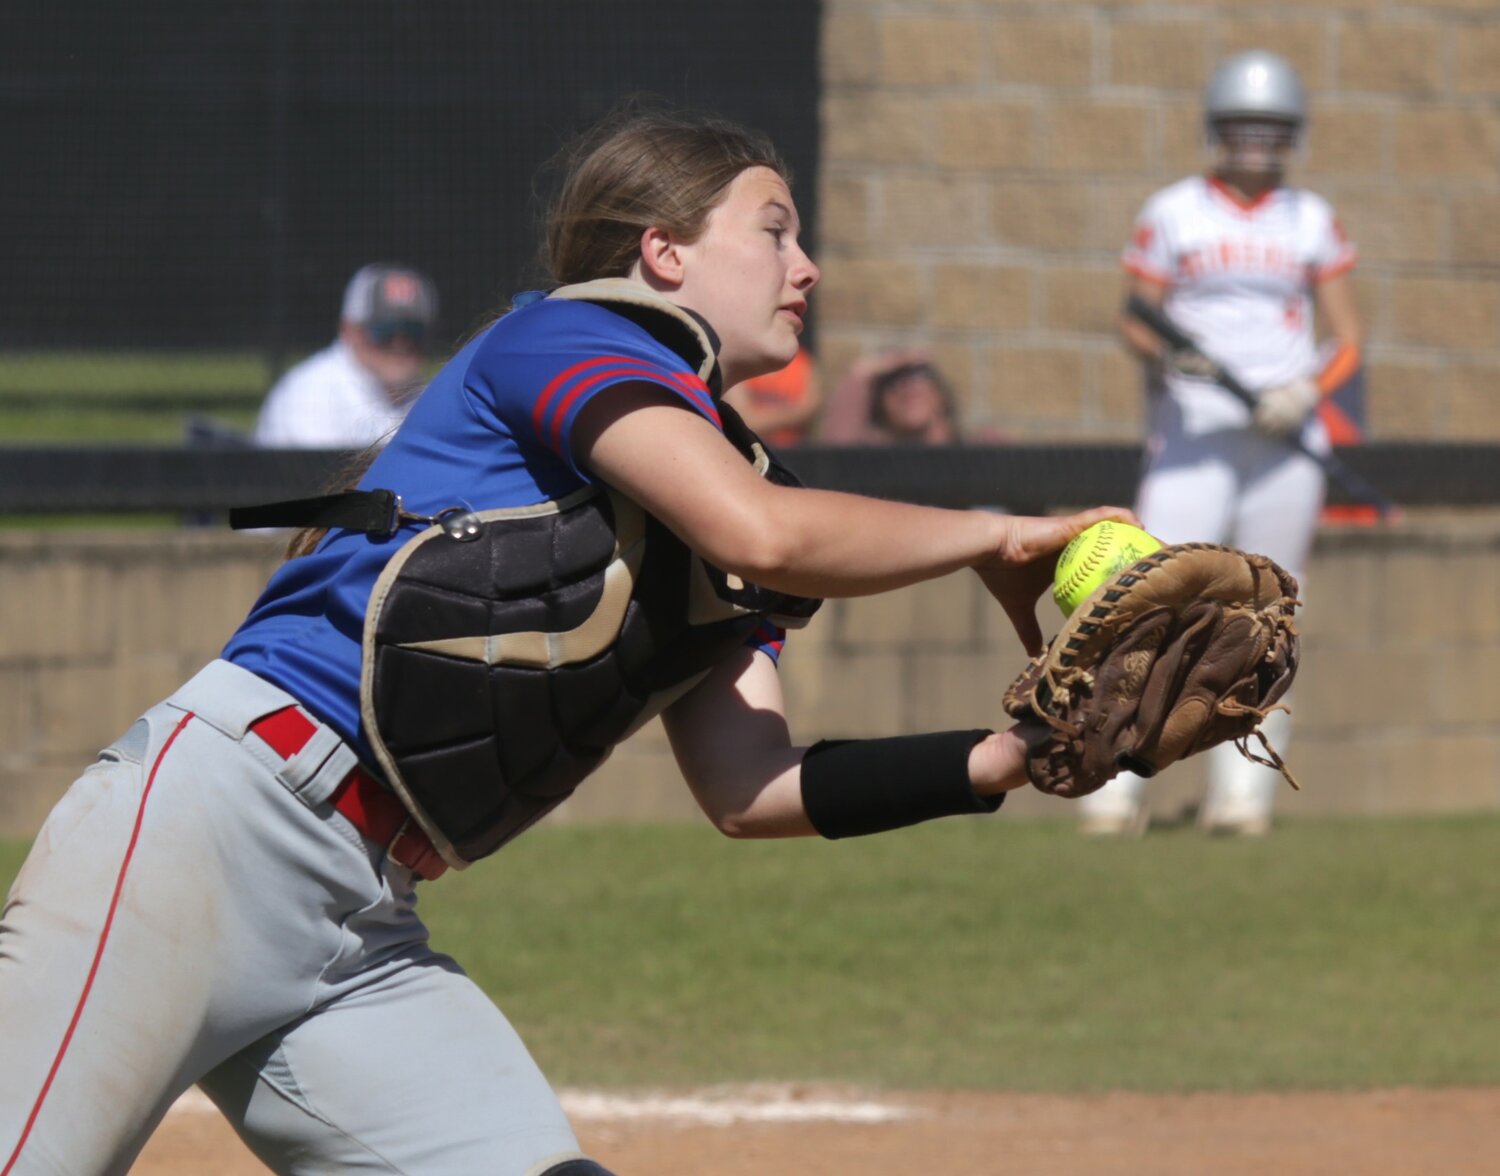 Lady Bulldog catcher Larkin Spears comes out from behind the plate to make a great catch.